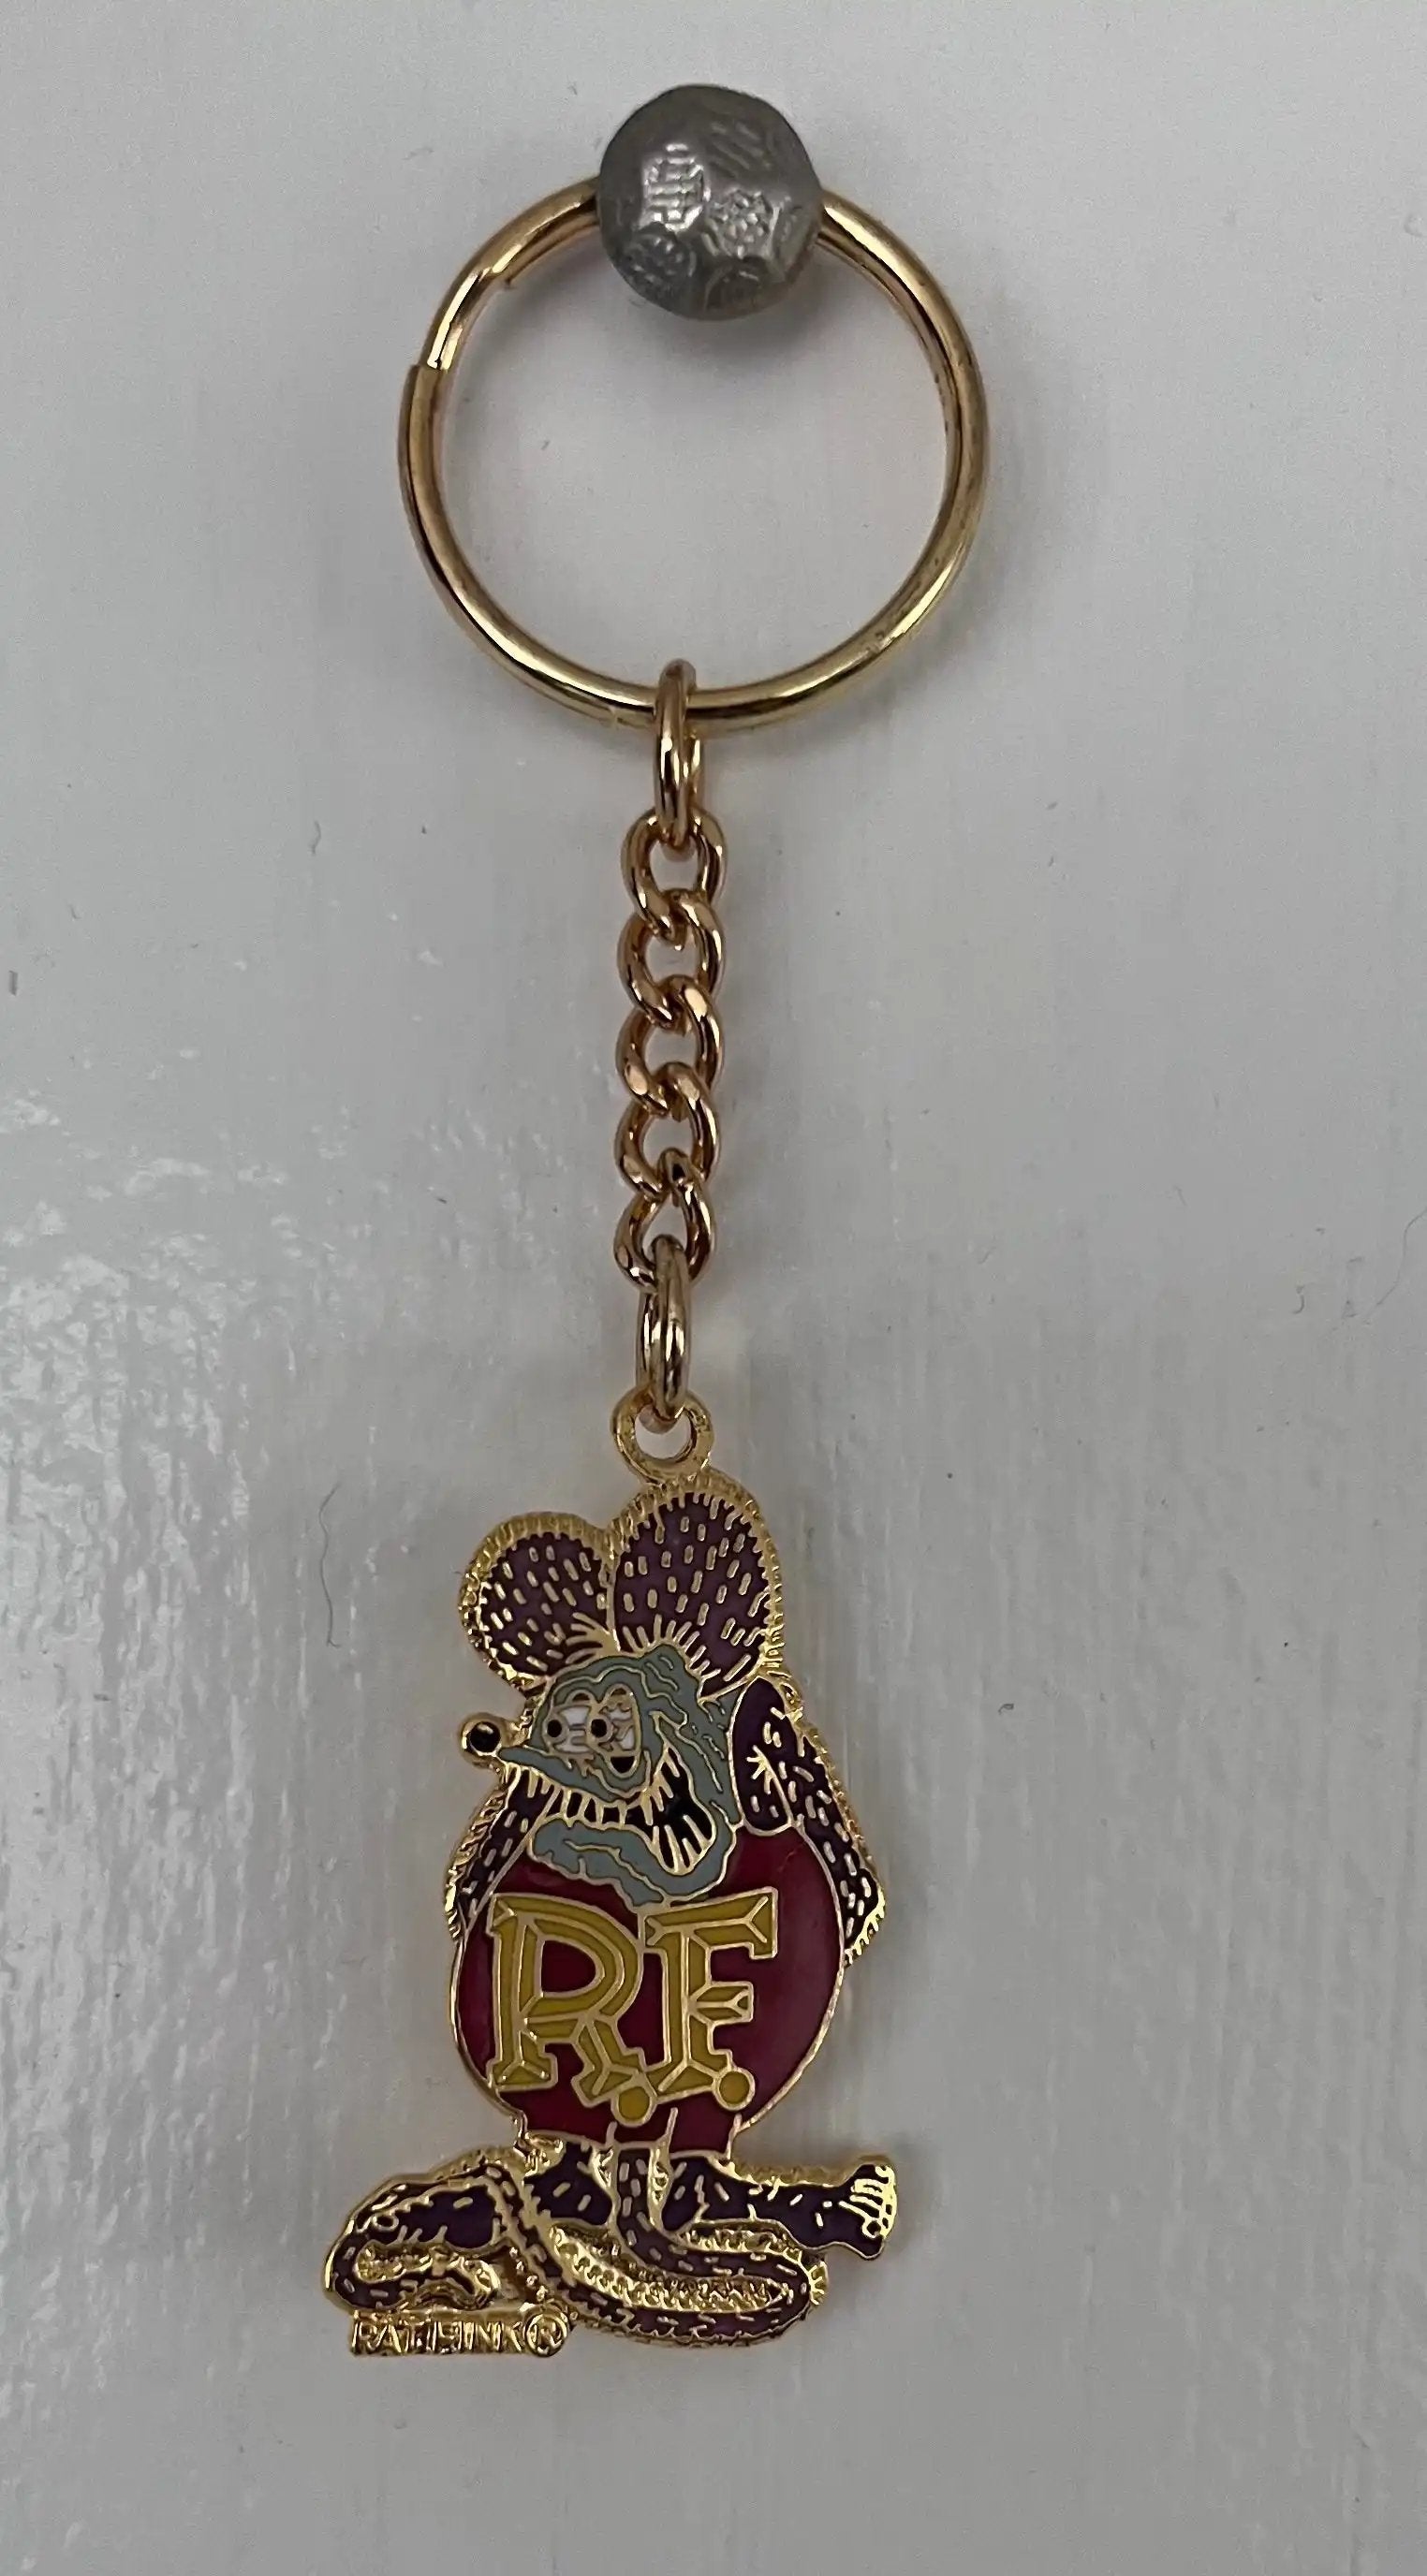 RAT FINK RF Gold Metal Keychain Hot Rod Accessories New Old Stock Mint never used and stored away safely for decades check out all the Rat Fink memorabilia in stock